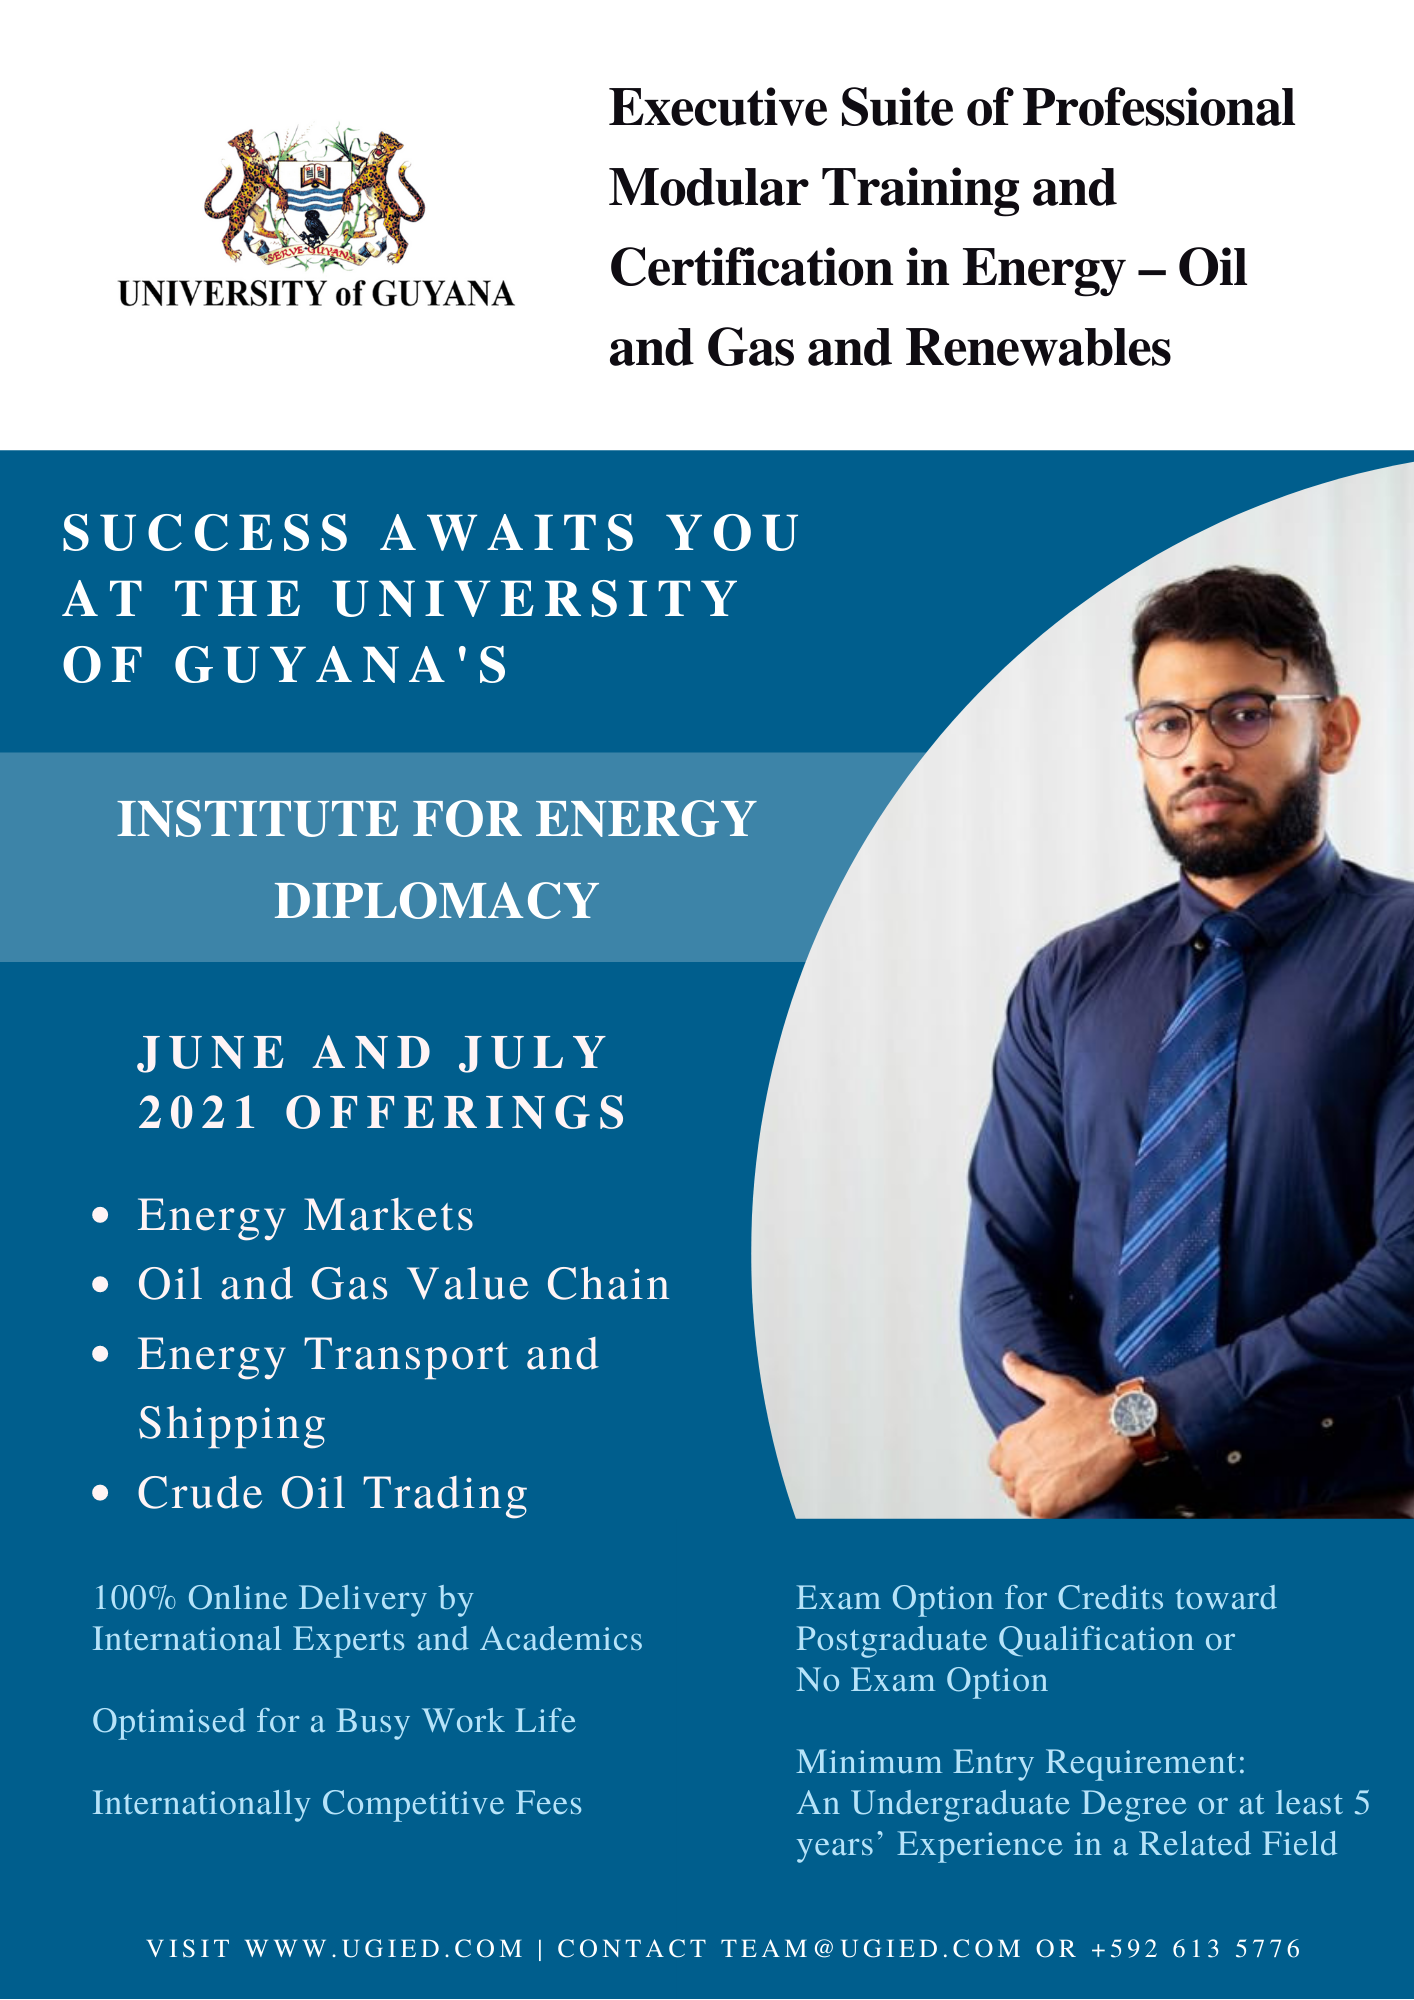 University of Guyana’s Institute for Energy Diplomacy Launches Professional Executive  Training Suite of Courses in Oil and Gas, Renewable Energy for 2021 